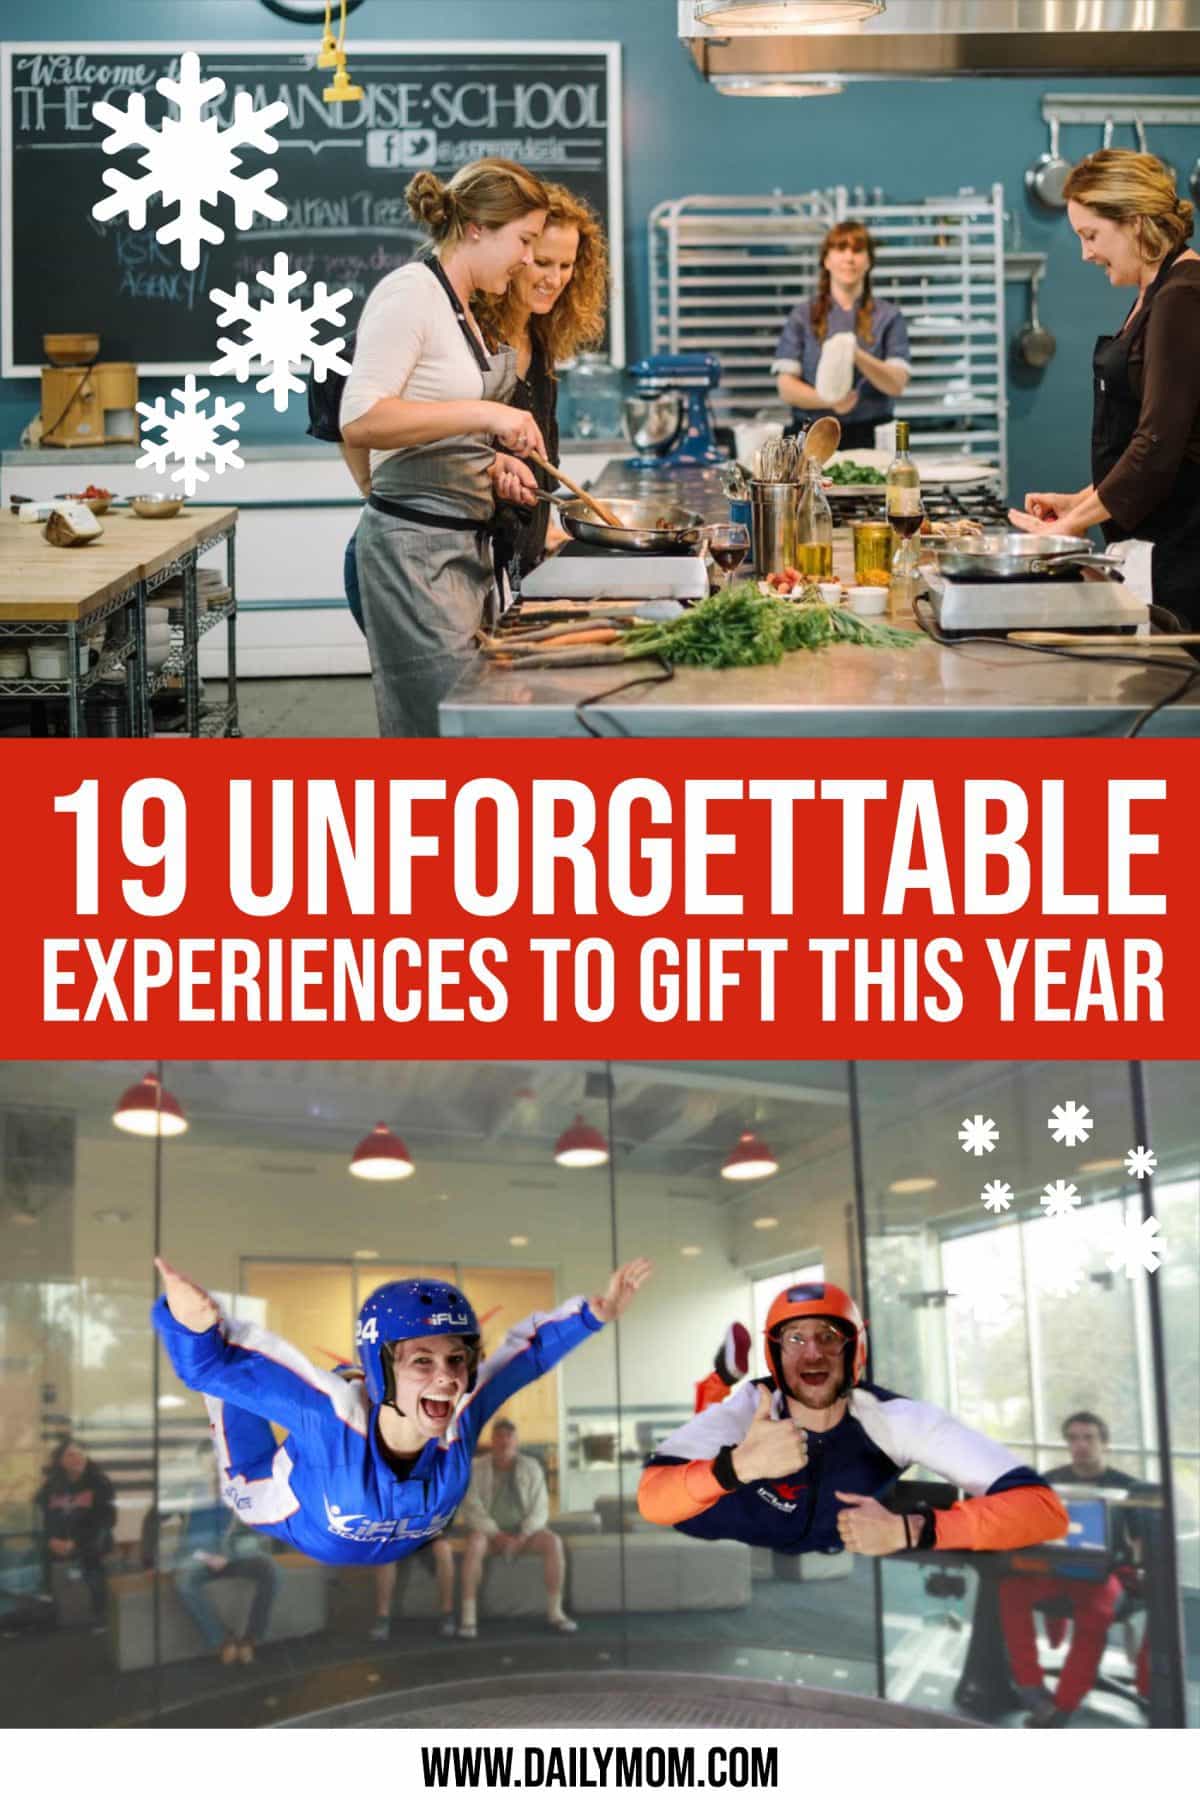 19 Unforgettable Experiences To Give This Year